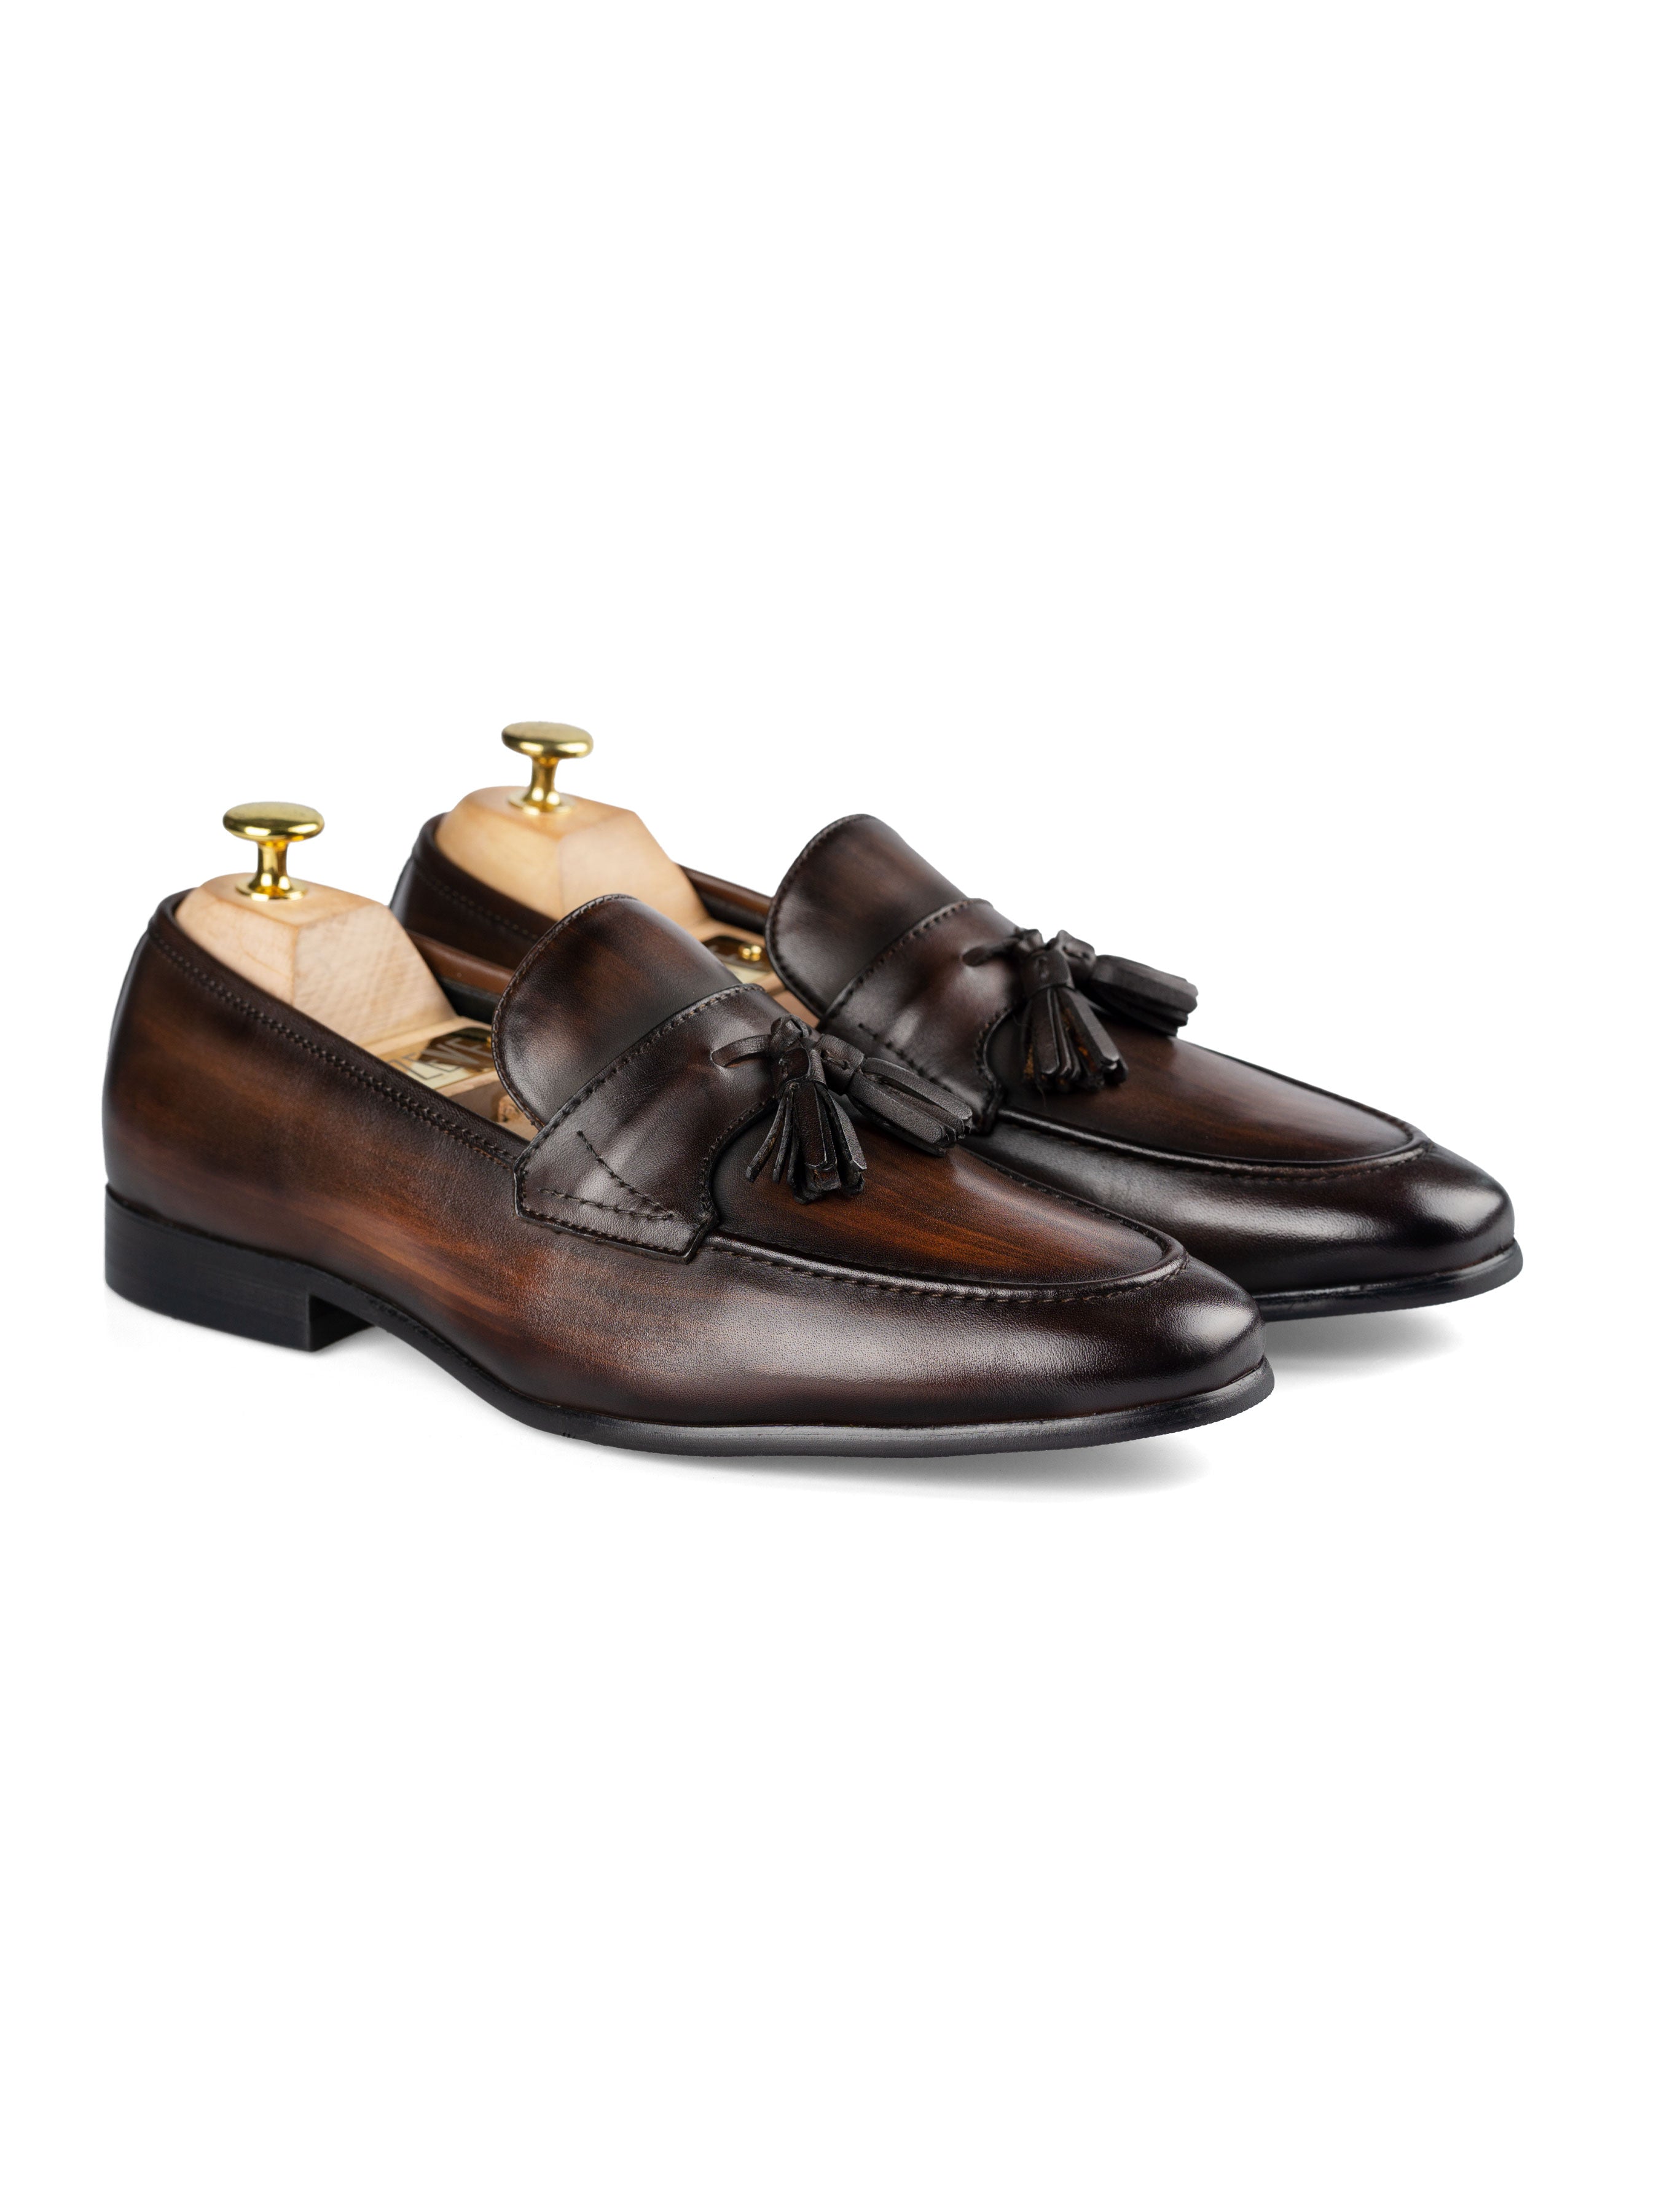 Tassel Loafer Wing Strap - Dark Brown (Hand Painted Patina) - Zeve Shoes